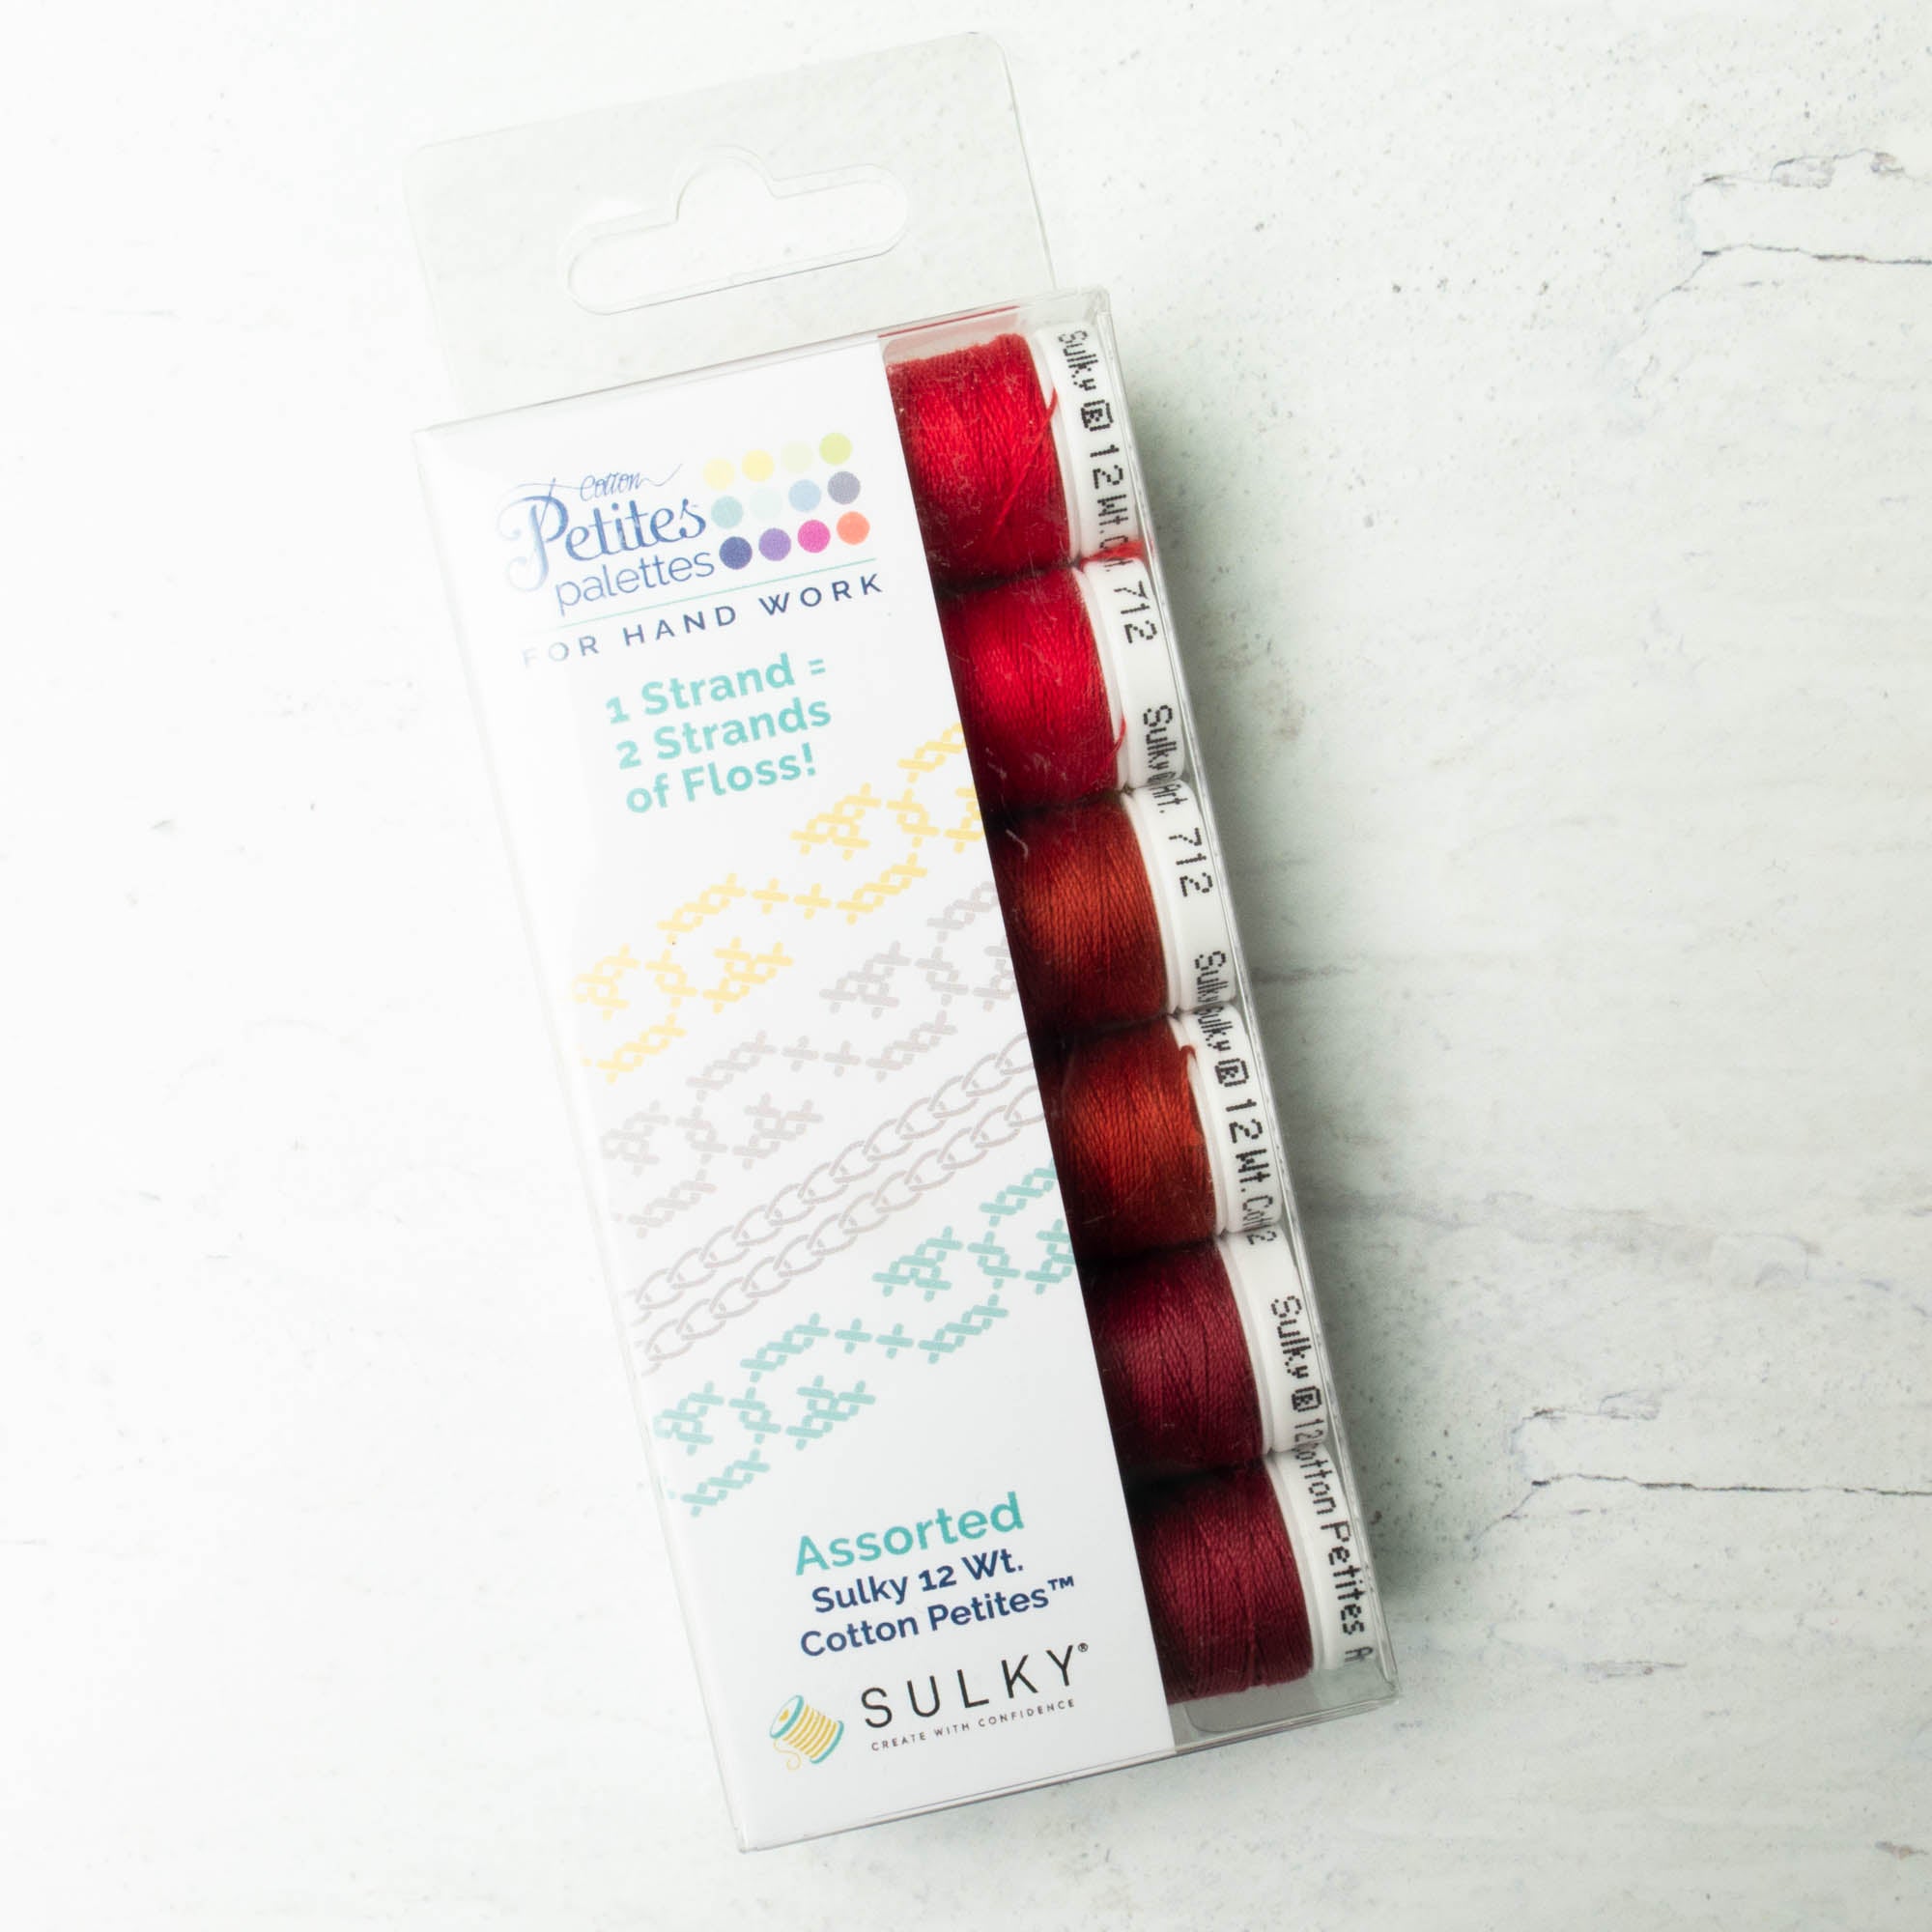 Sulky 12 Wt. Cotton Petites Thread - 6 Most Popular Colors Sampler